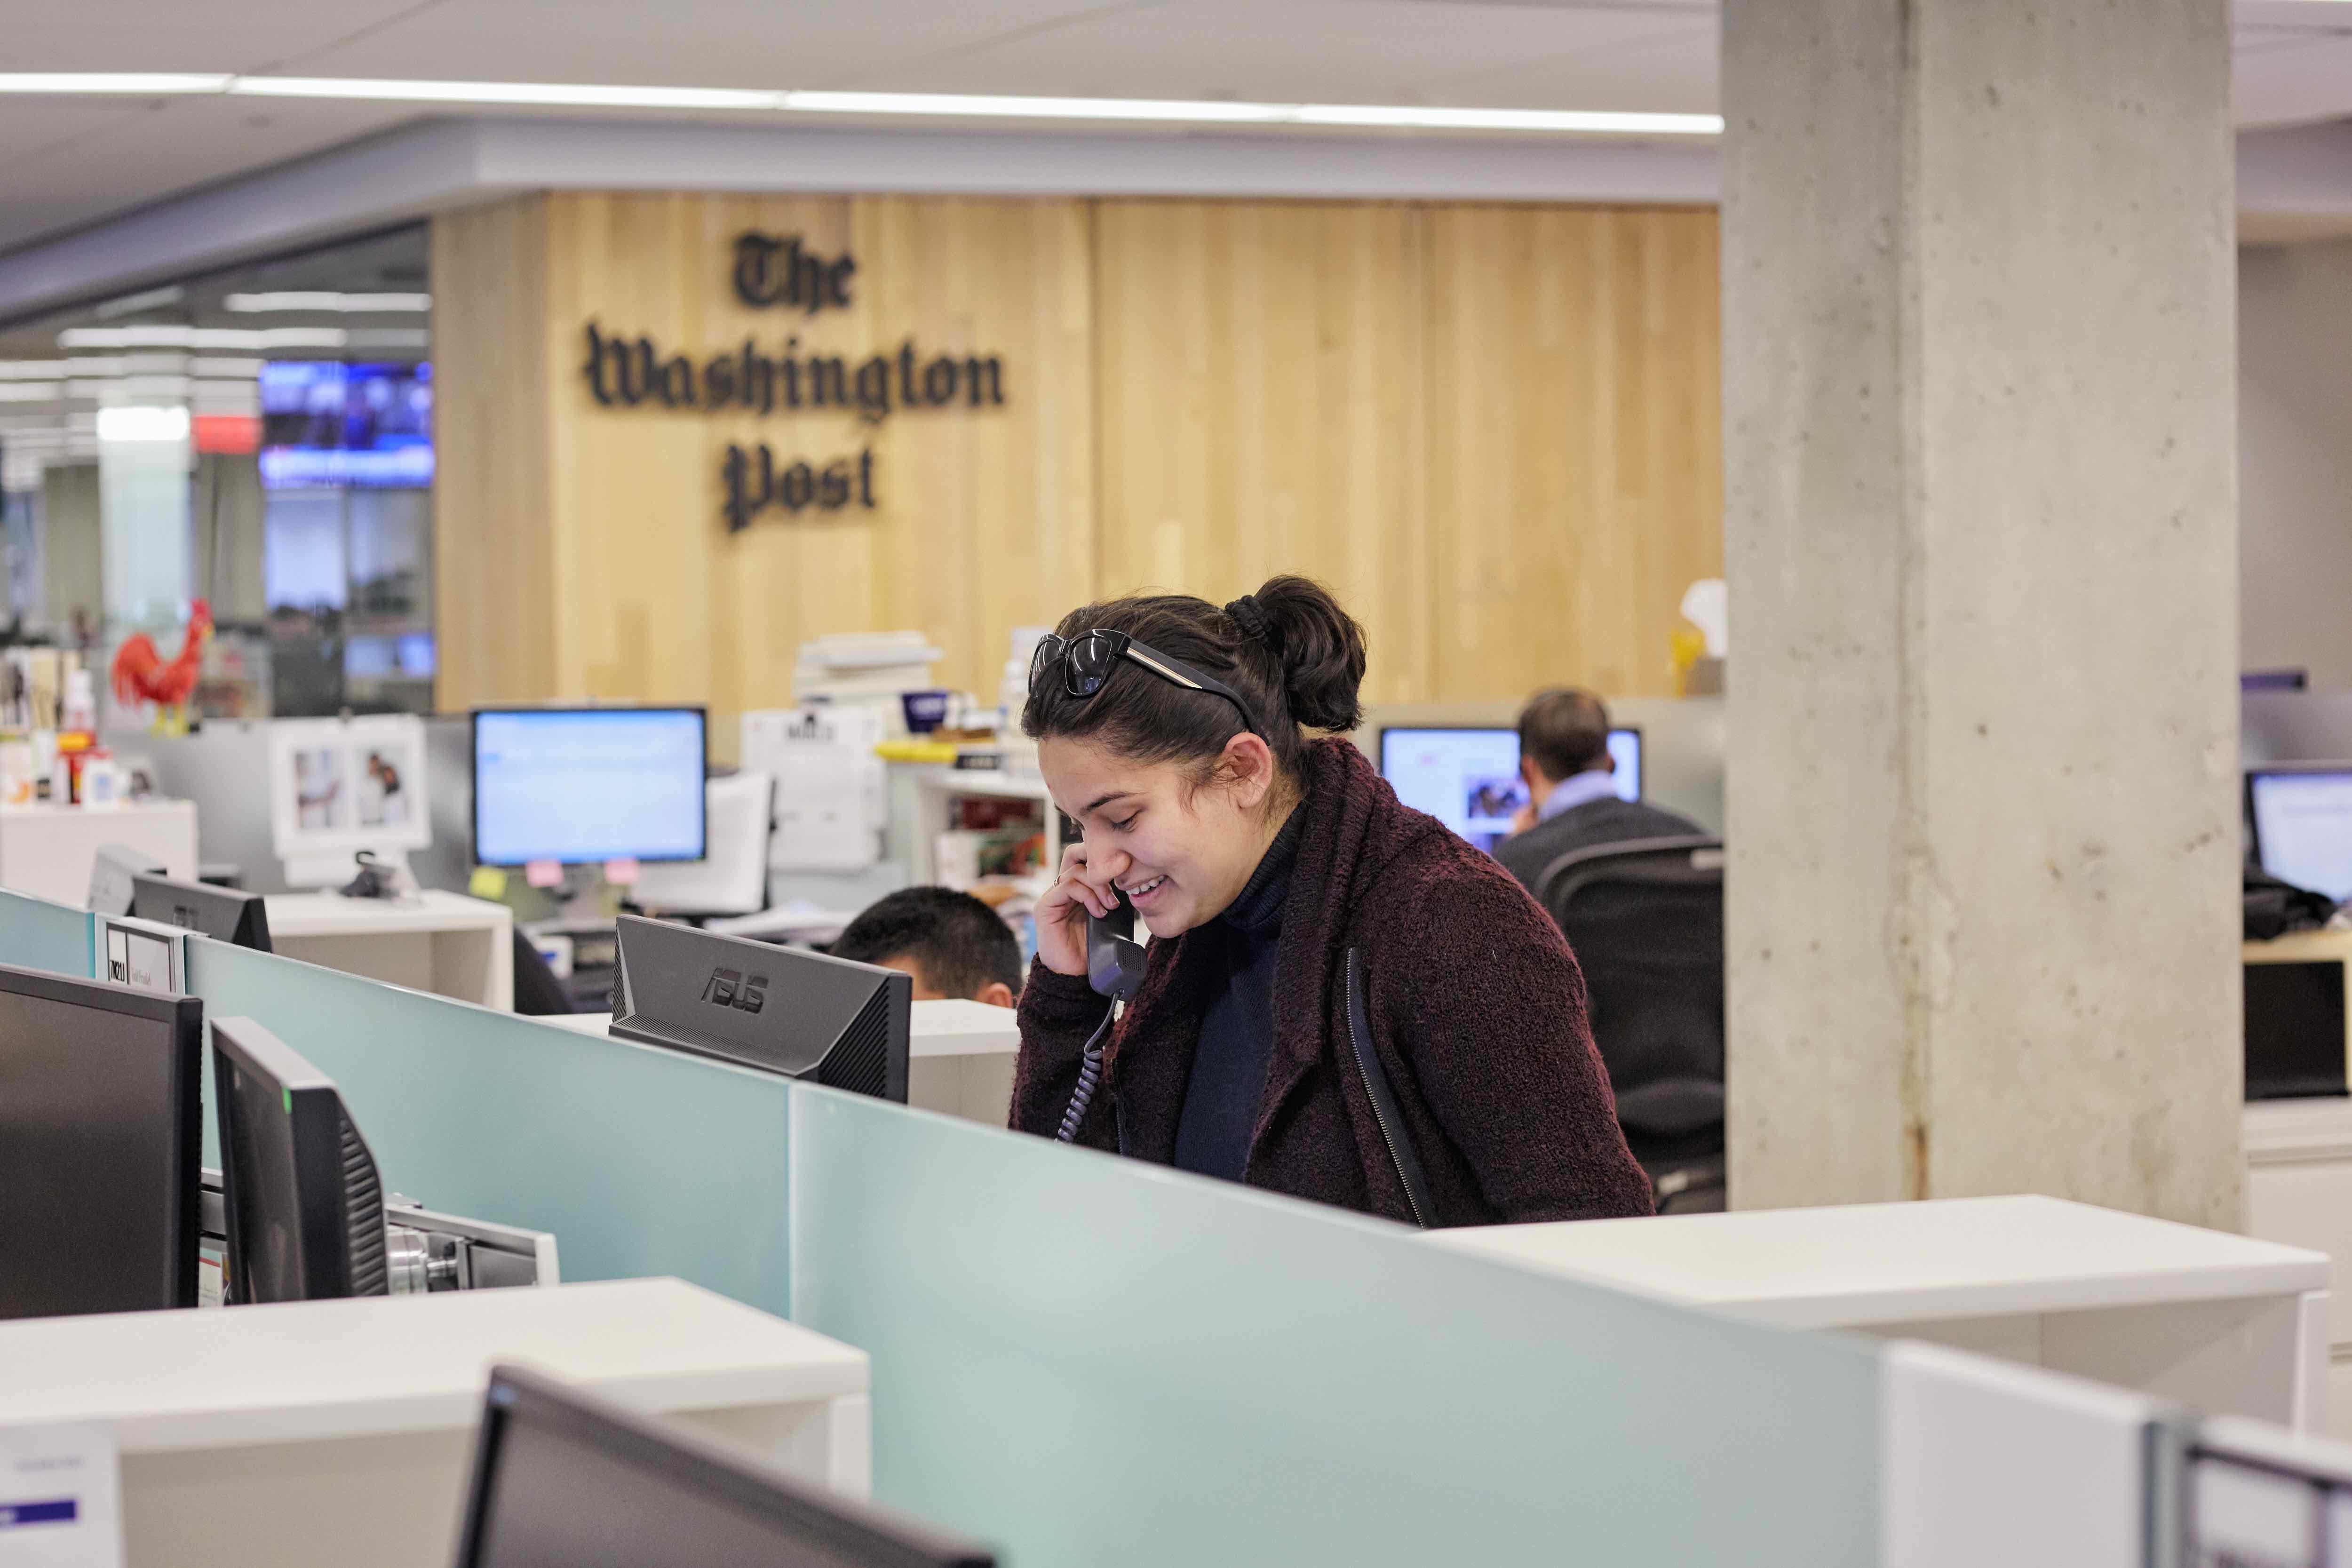 As part of the university’s Journalism and Strategic Communication residency program, NU-Q student Jia Naqvi interned with The Washington Post in 2017.